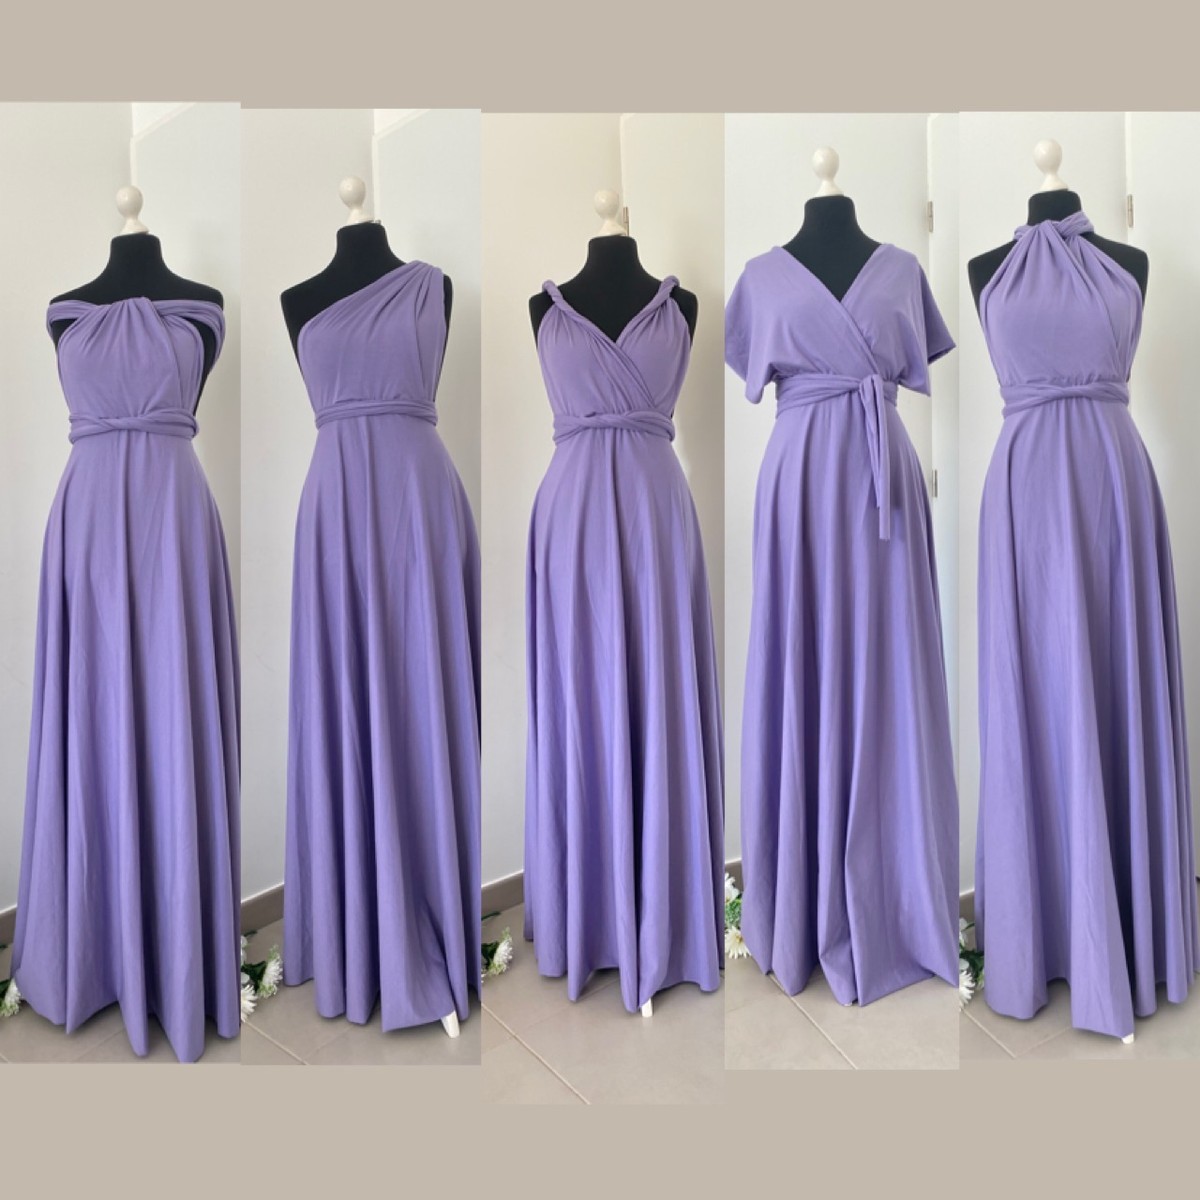 Different Ways To Tie An Infinity Dress